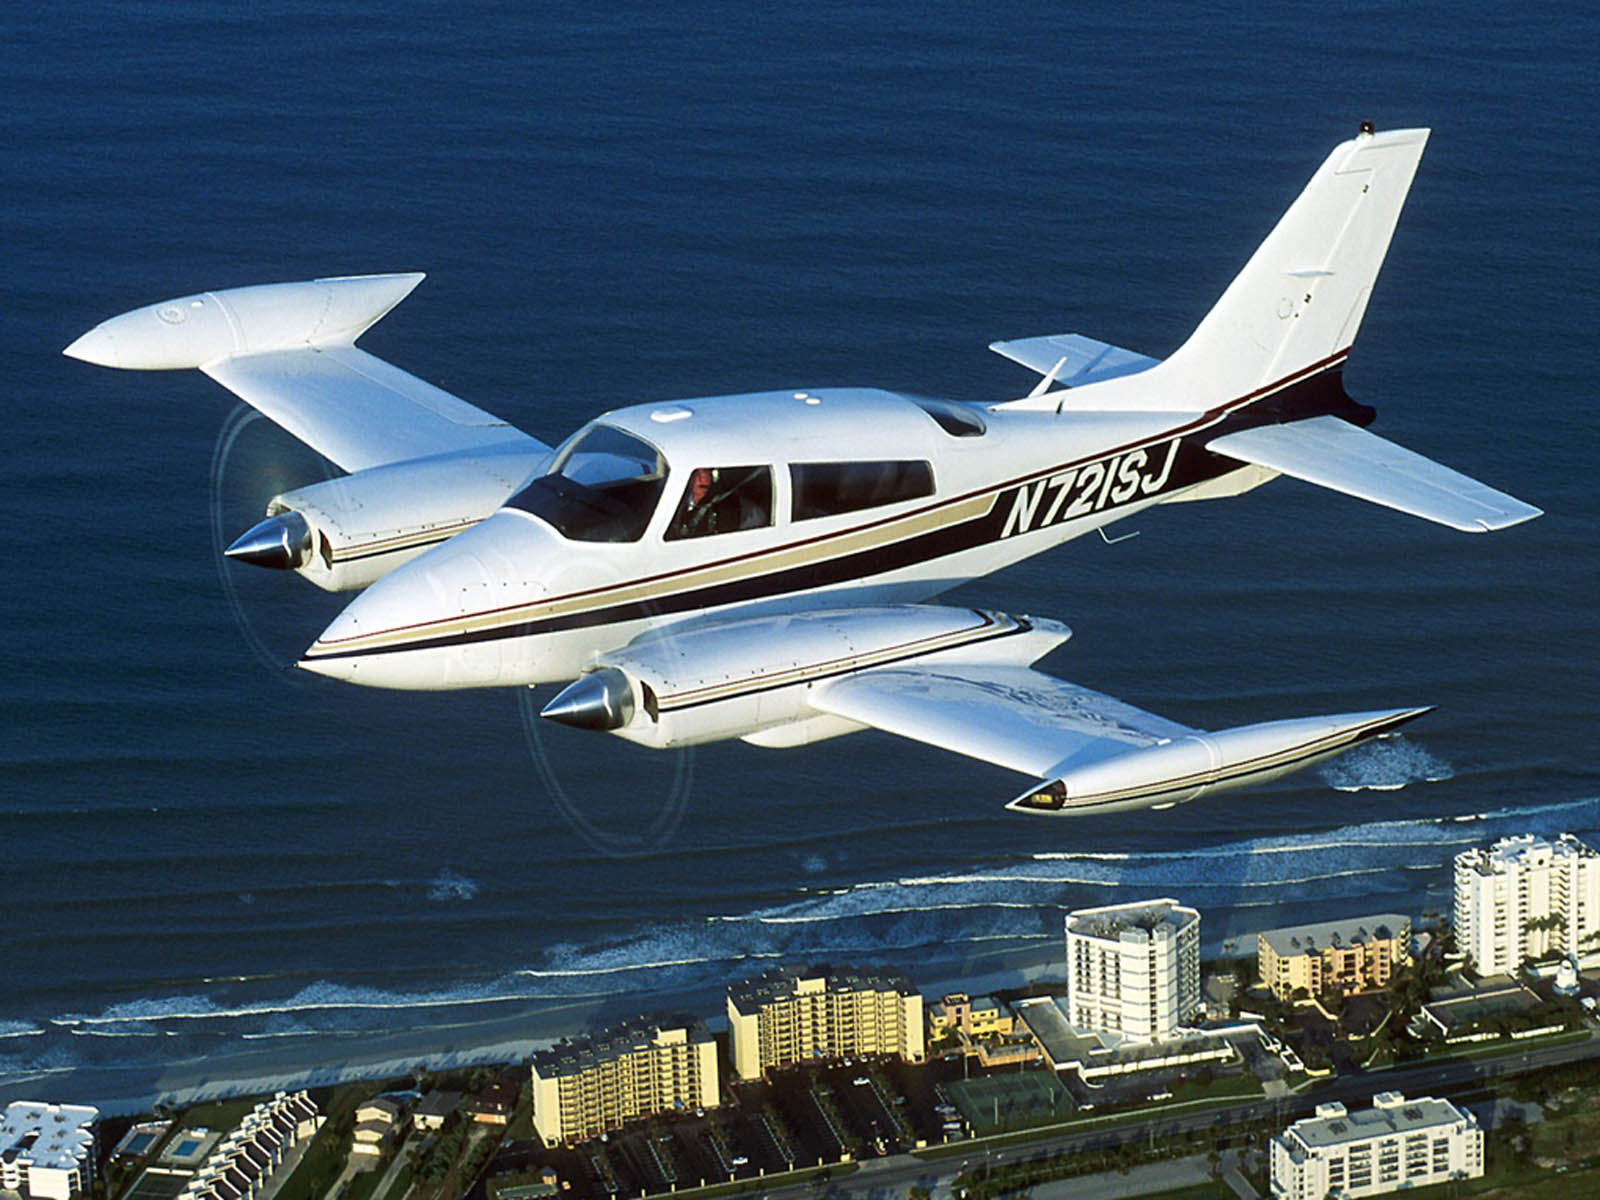 Tag Cessna Aircraft Wallpaper Image Photos And Pictures For